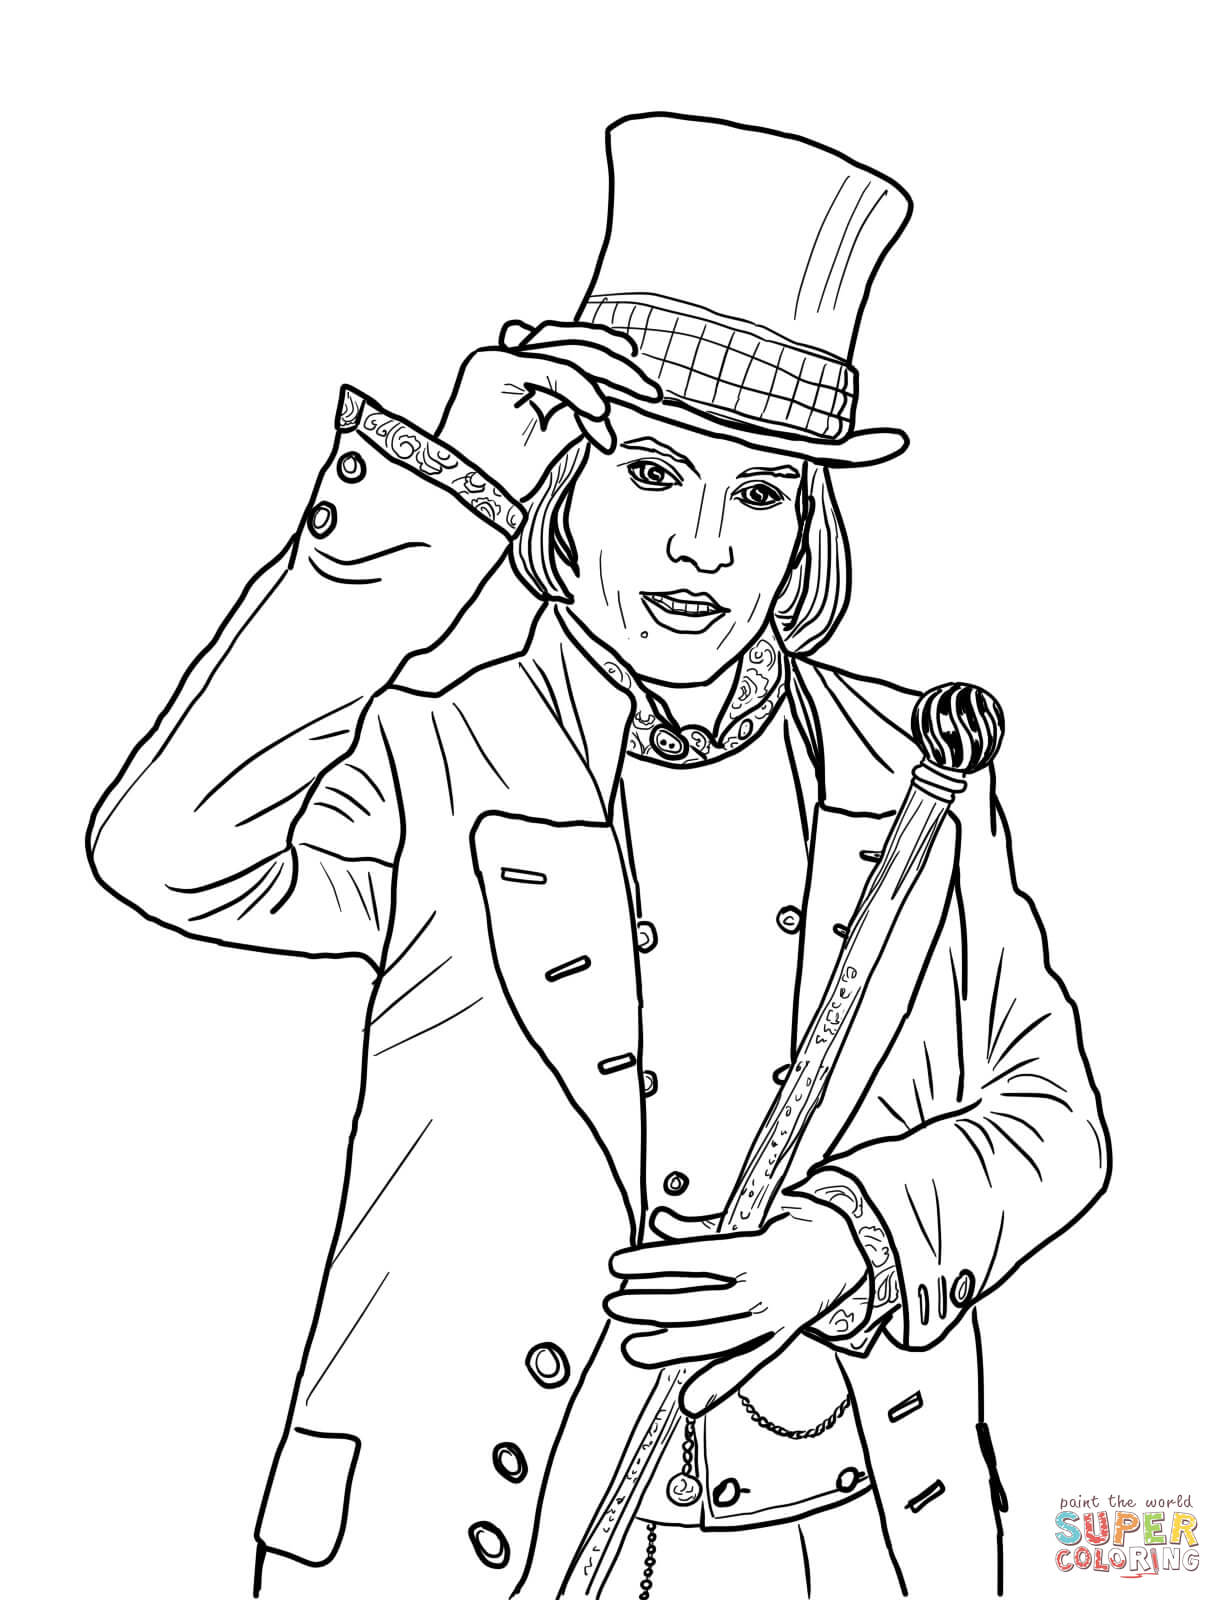 Charlie and chocolate factory coloring pages | Free Coloring Pages